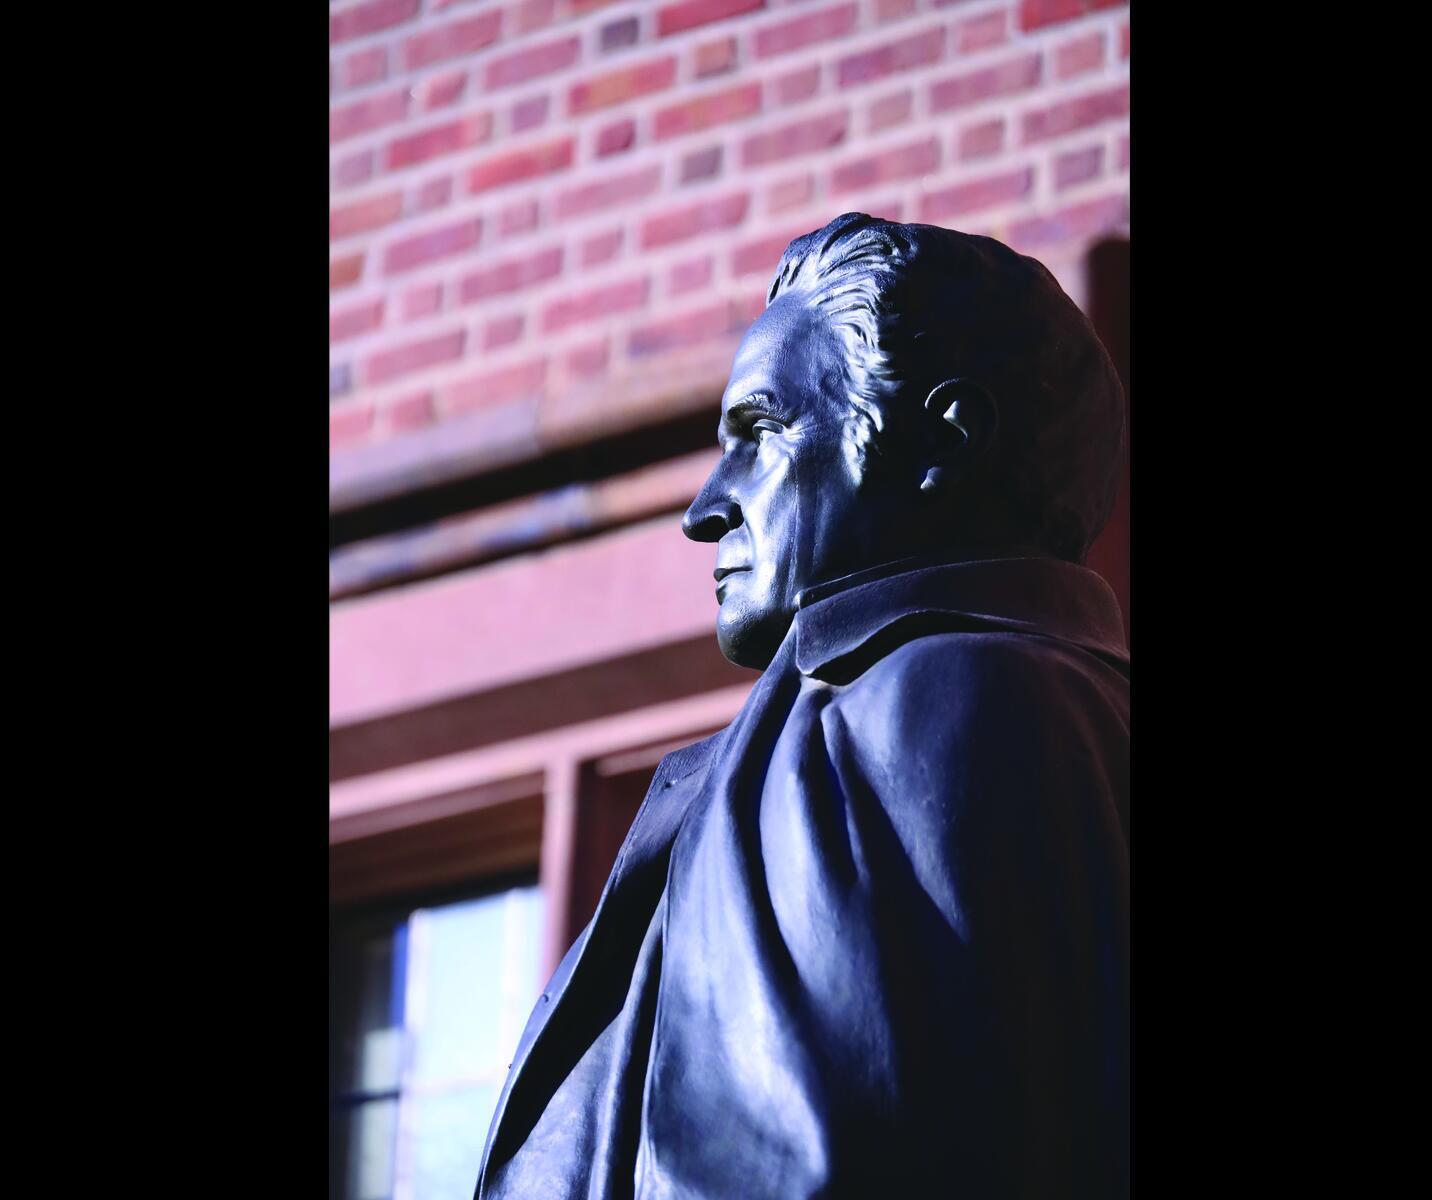 Metal bust of a historical figure against brick wall